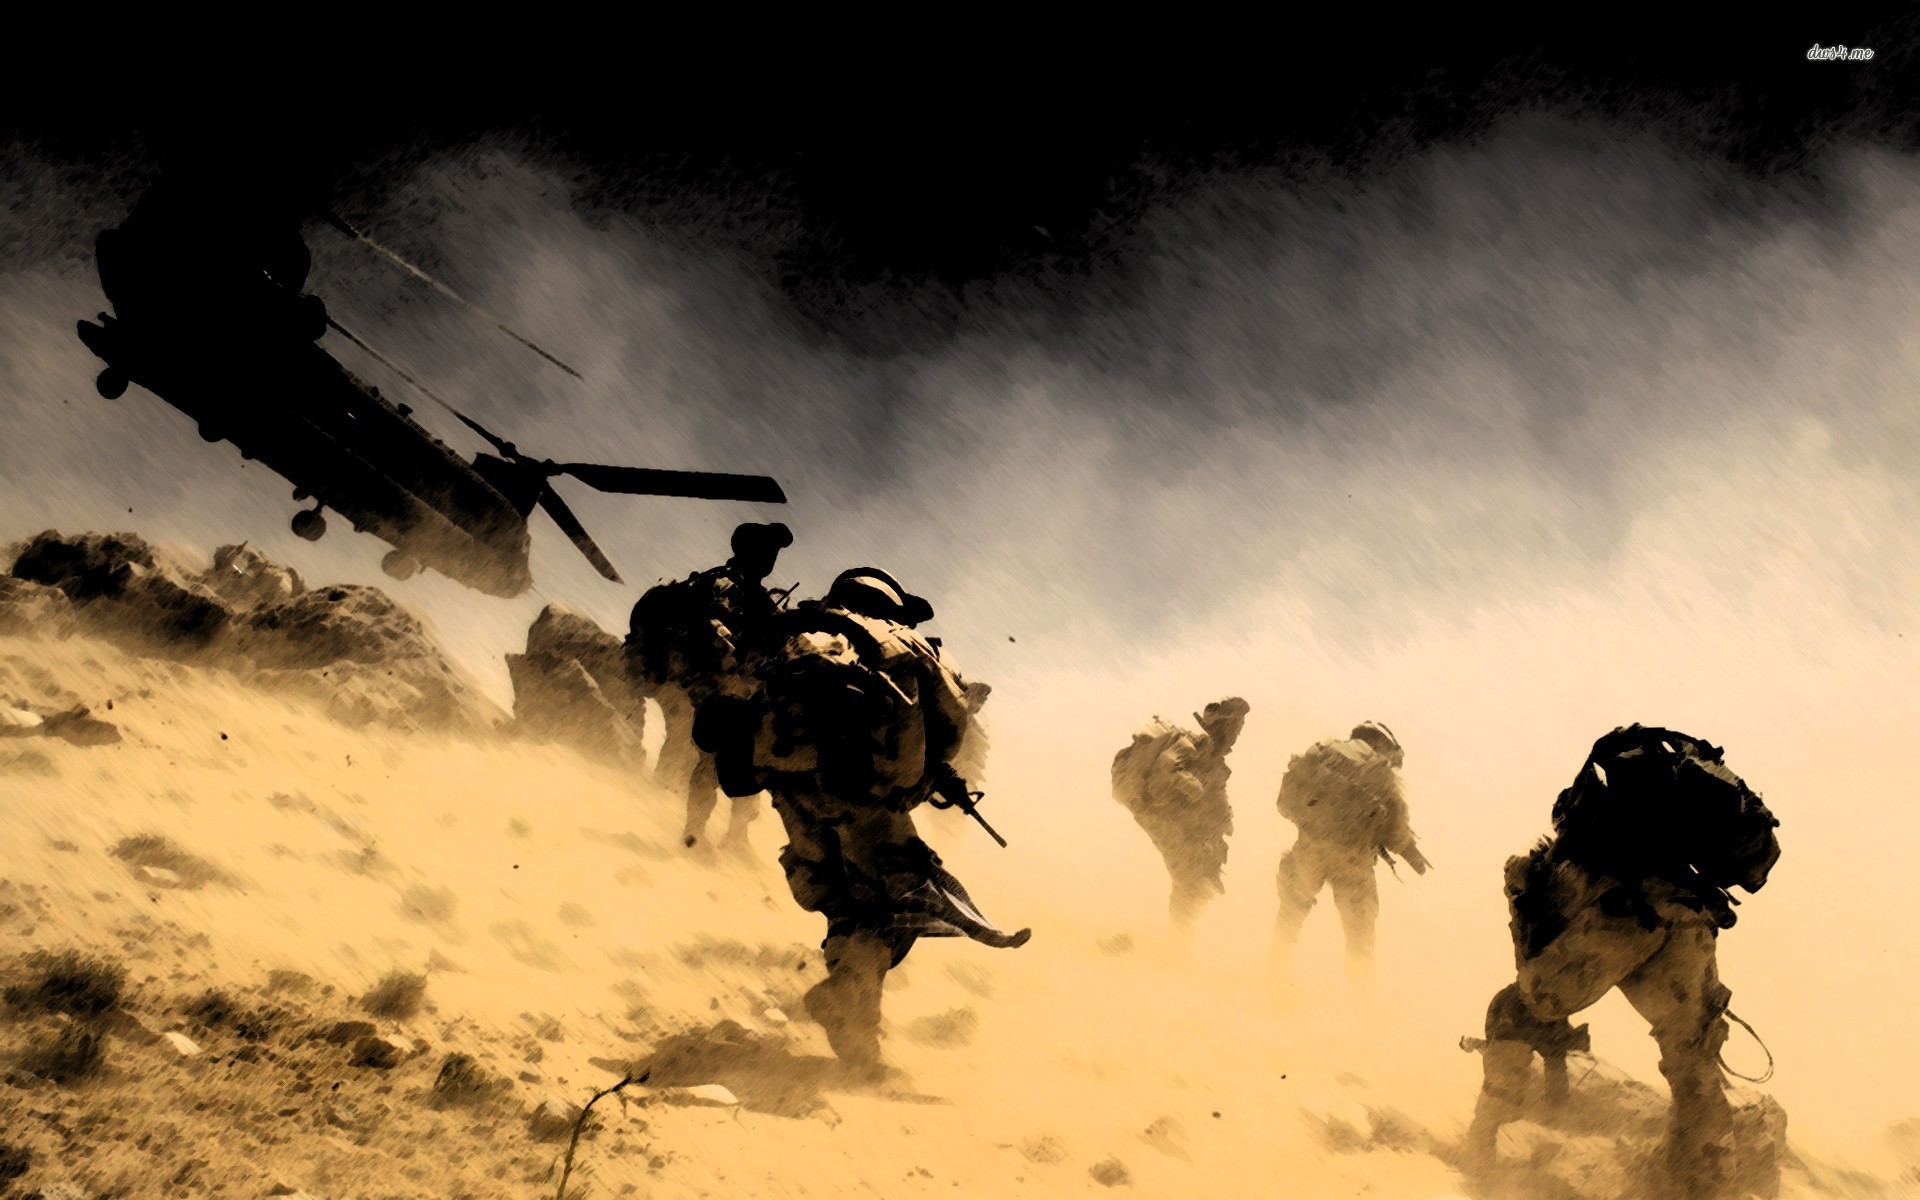 In Fight Military Wallpaper Image Size Pics